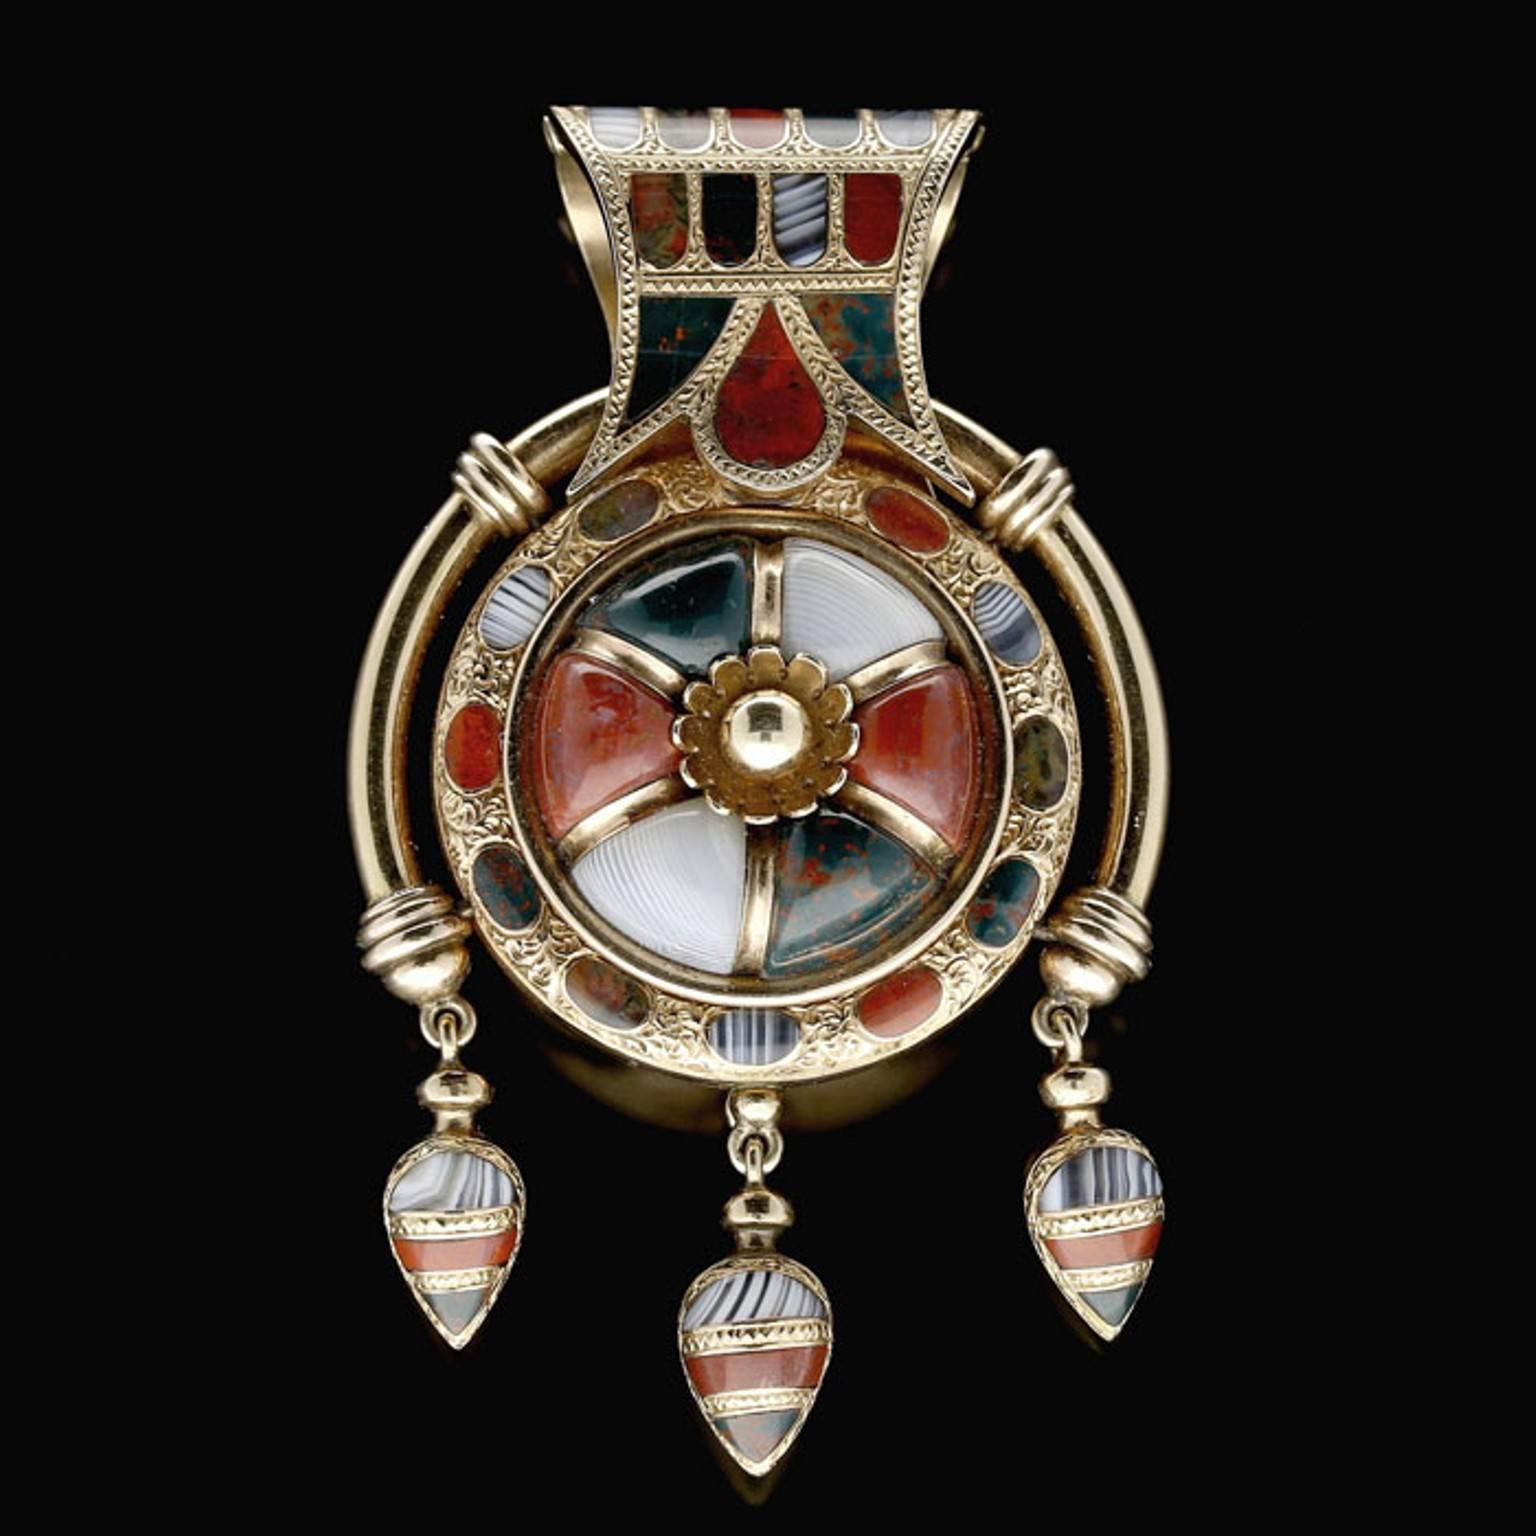 Agate, bloodstone and jasper
18ct yellow gold
6cm long and 3.6cm wide
30 grams

A beautiful gold and Scottish pebble bulla pendant, c. 1870, the striking pendant of Etruscan-inspired 'bulla' design centred on a flower motif with gold bead centre